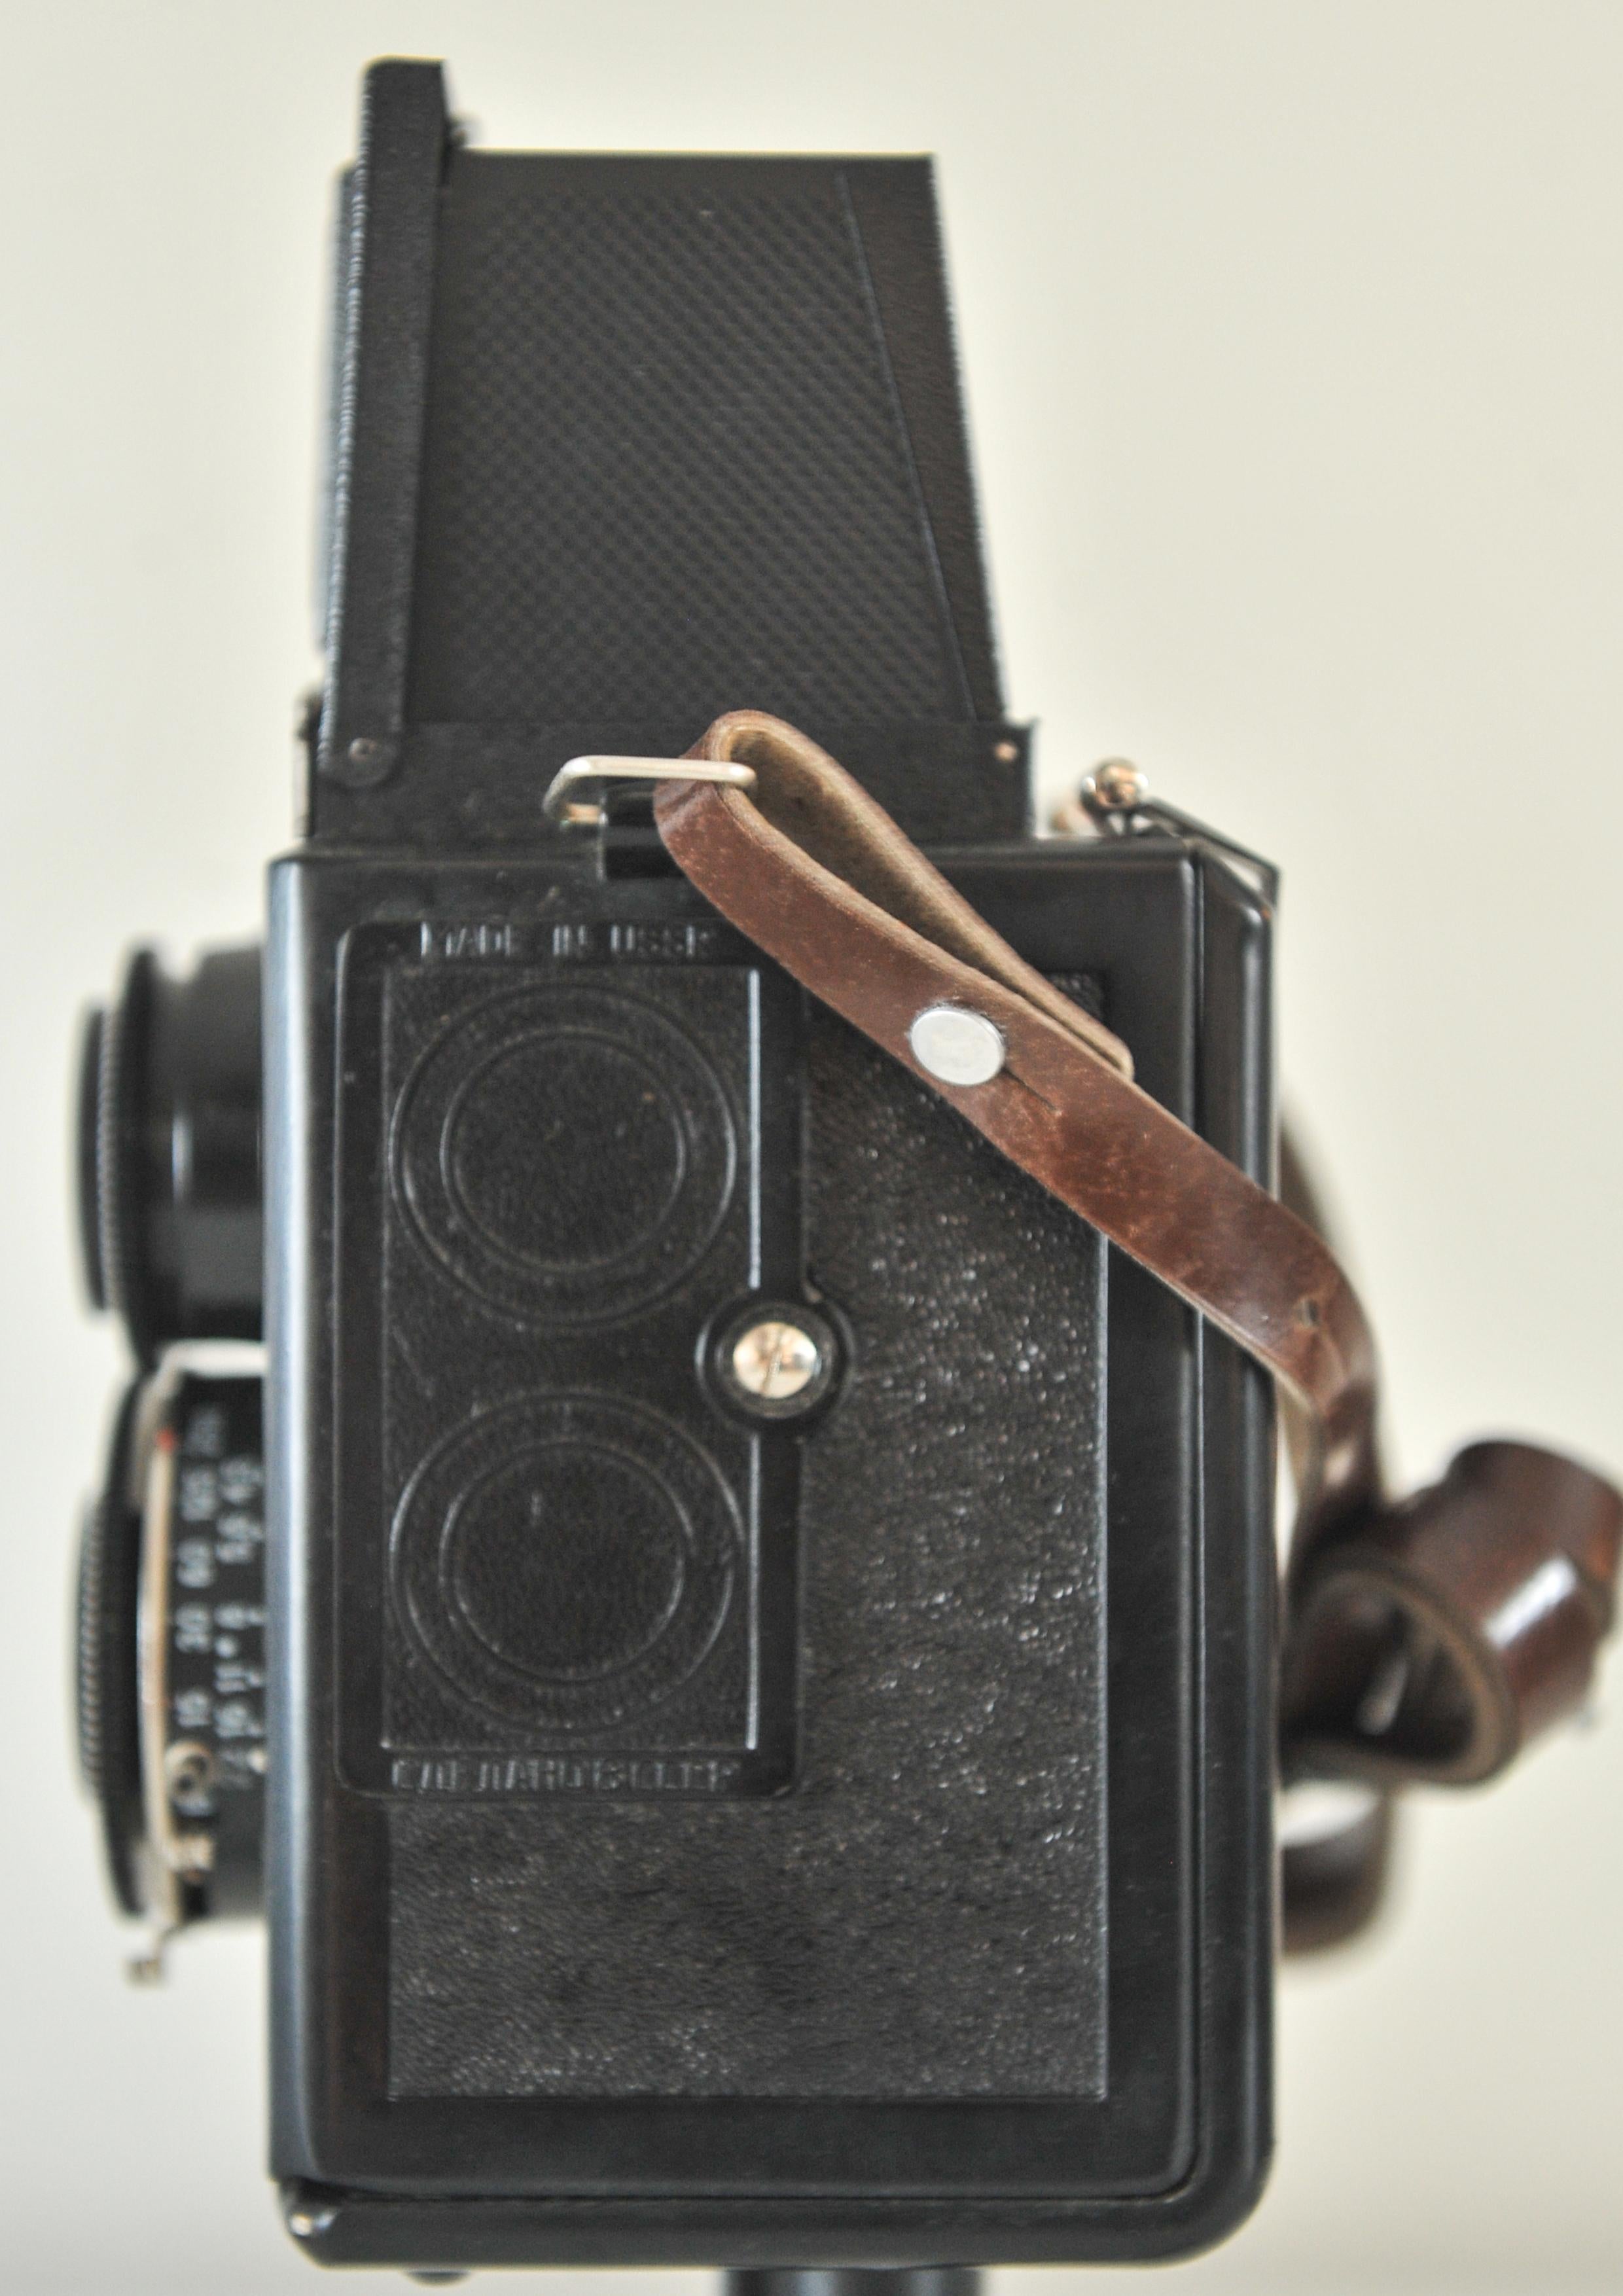 Lubitel 2 Bakelite With LOMO T-22 75/4.5 Taking Lens Manufactured by OMO  In Good Condition For Sale In High Wycombe, GB